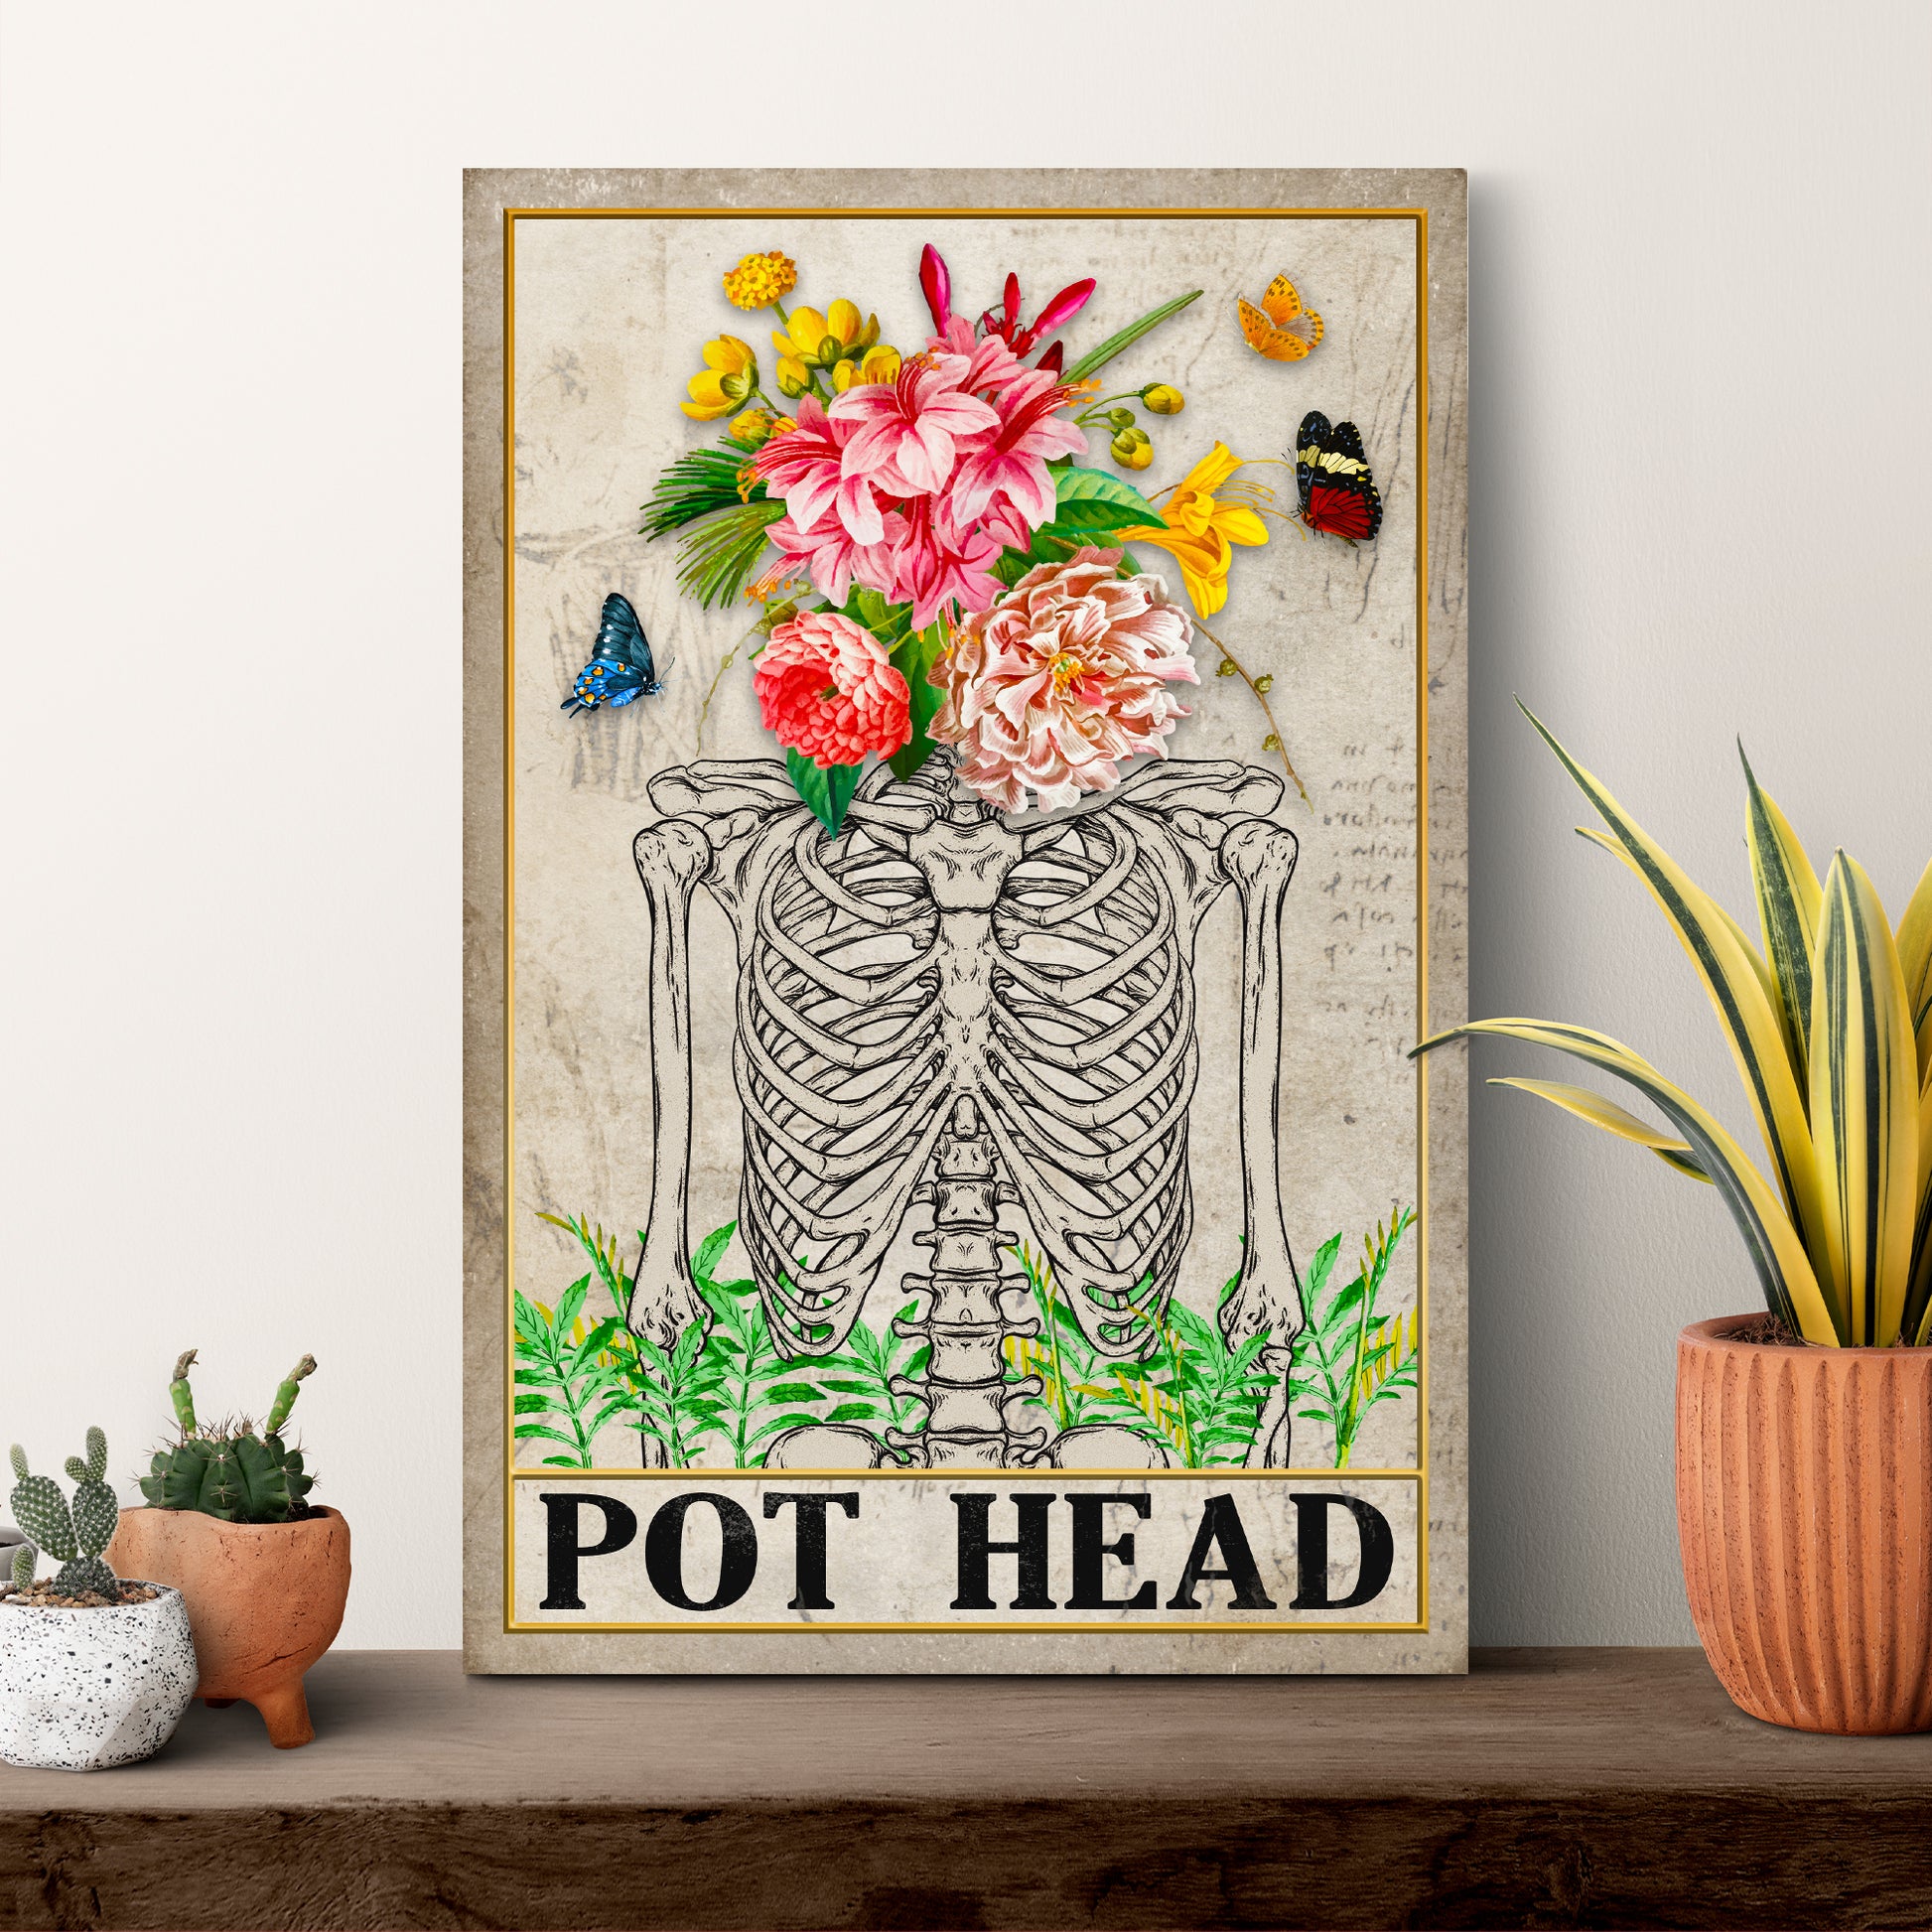 Pot Head Garden Sign II - Image by Tailored Canvases